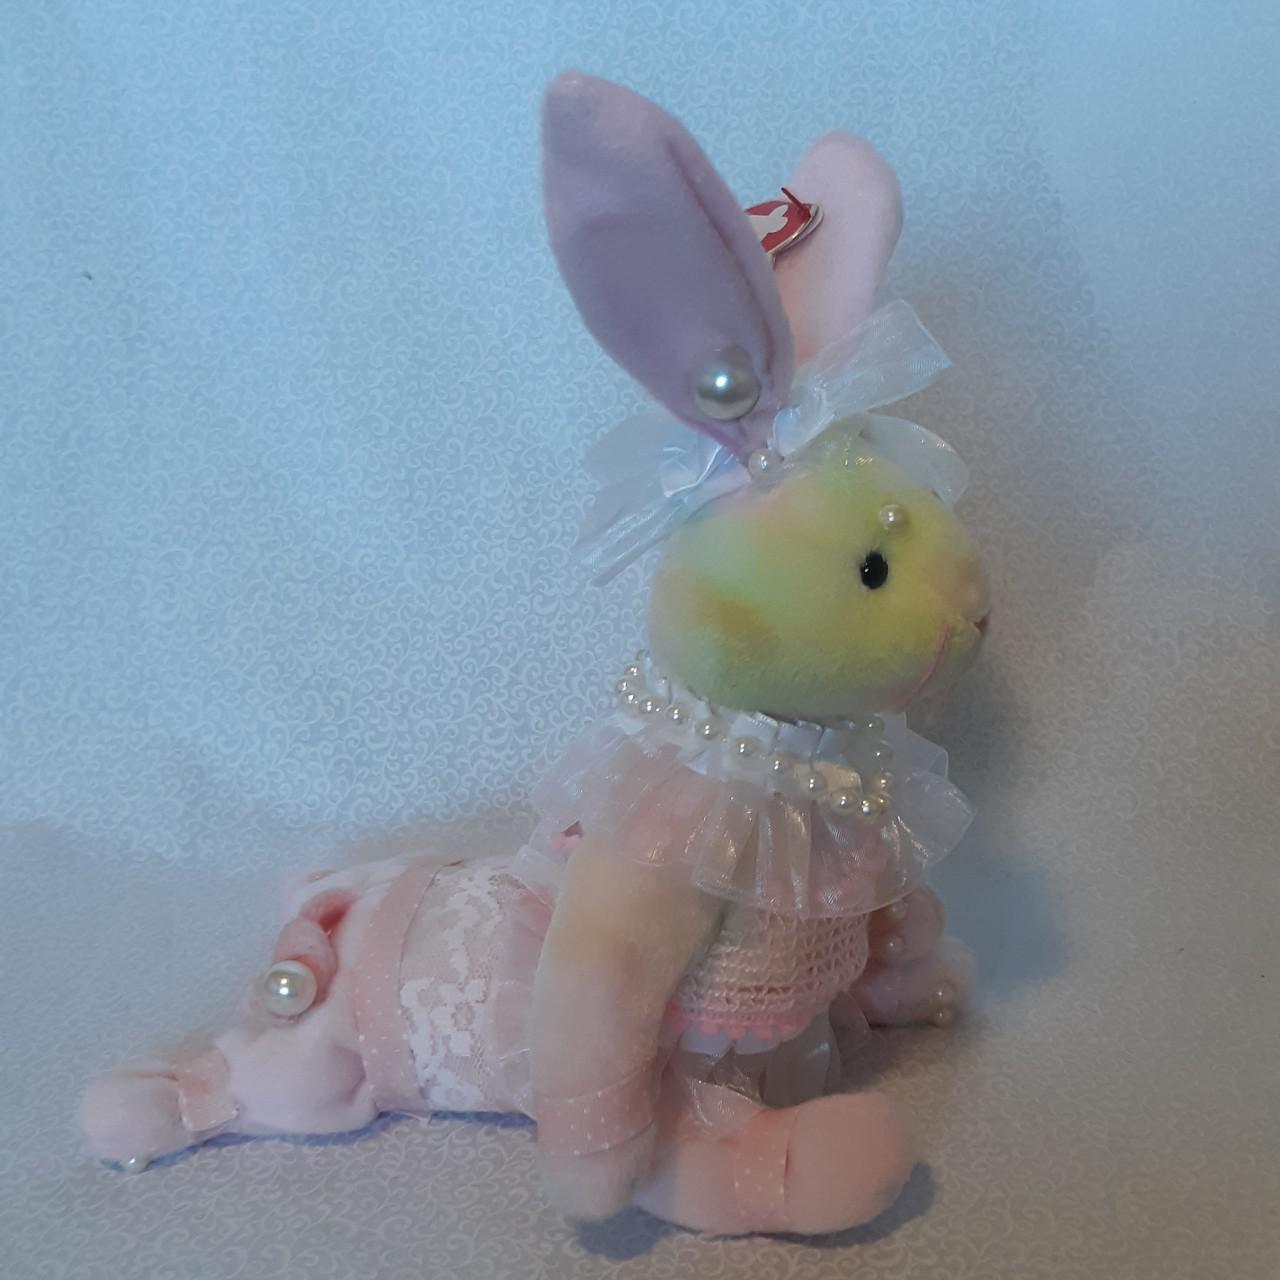 Product Image 2 - Pinky patty!!
RESERVED!!!

Pinky Patty is attending